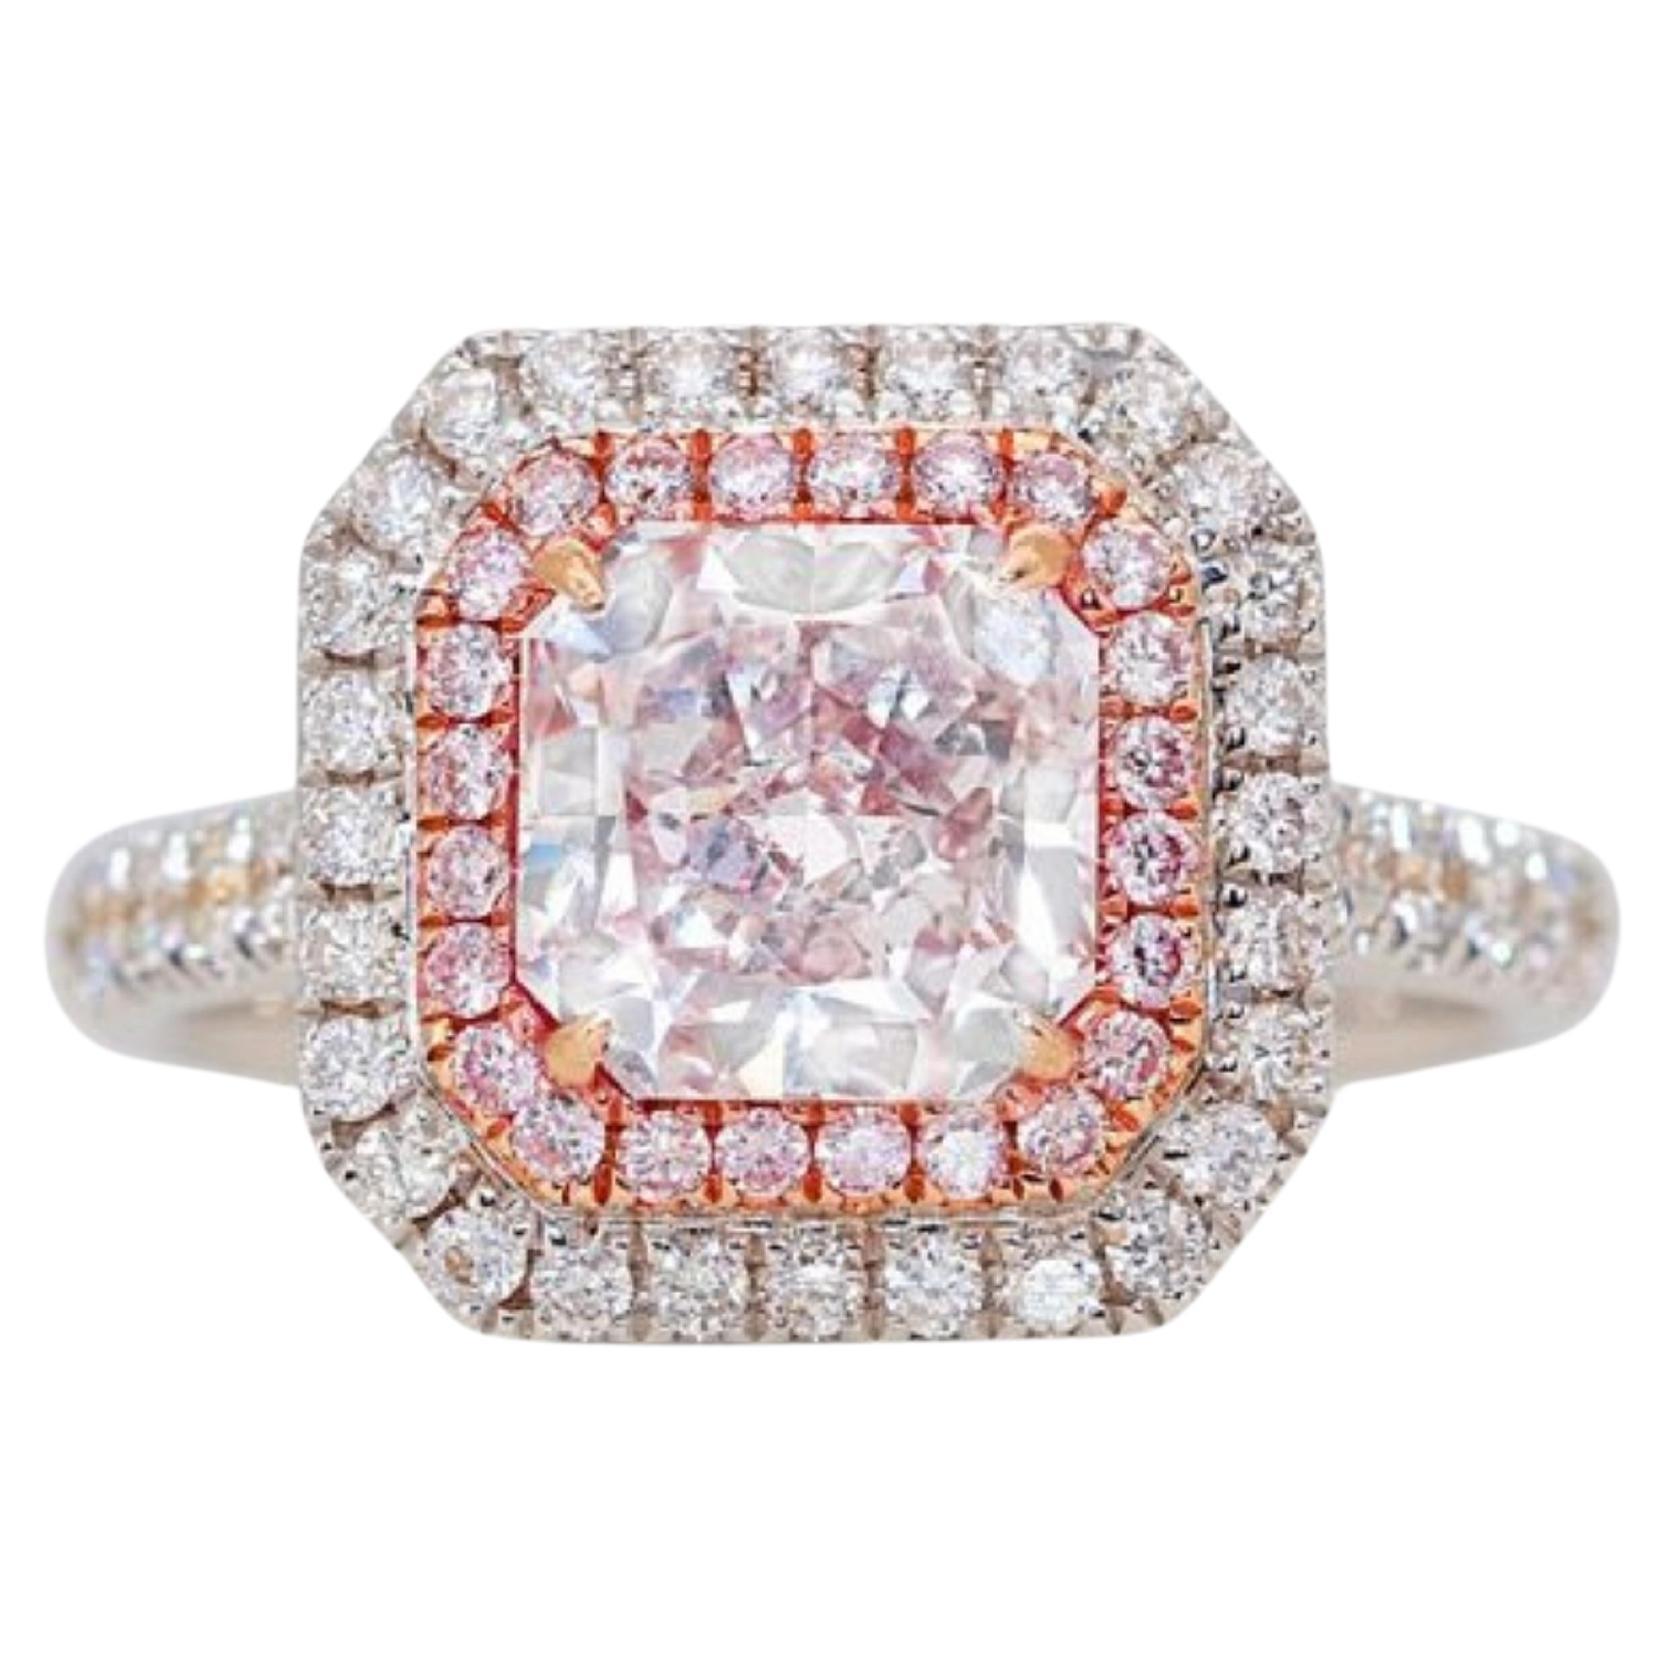 Captivating 18k White Gold Ring 1.86ct. Square Radiant Halo Diamond Ring For Sale